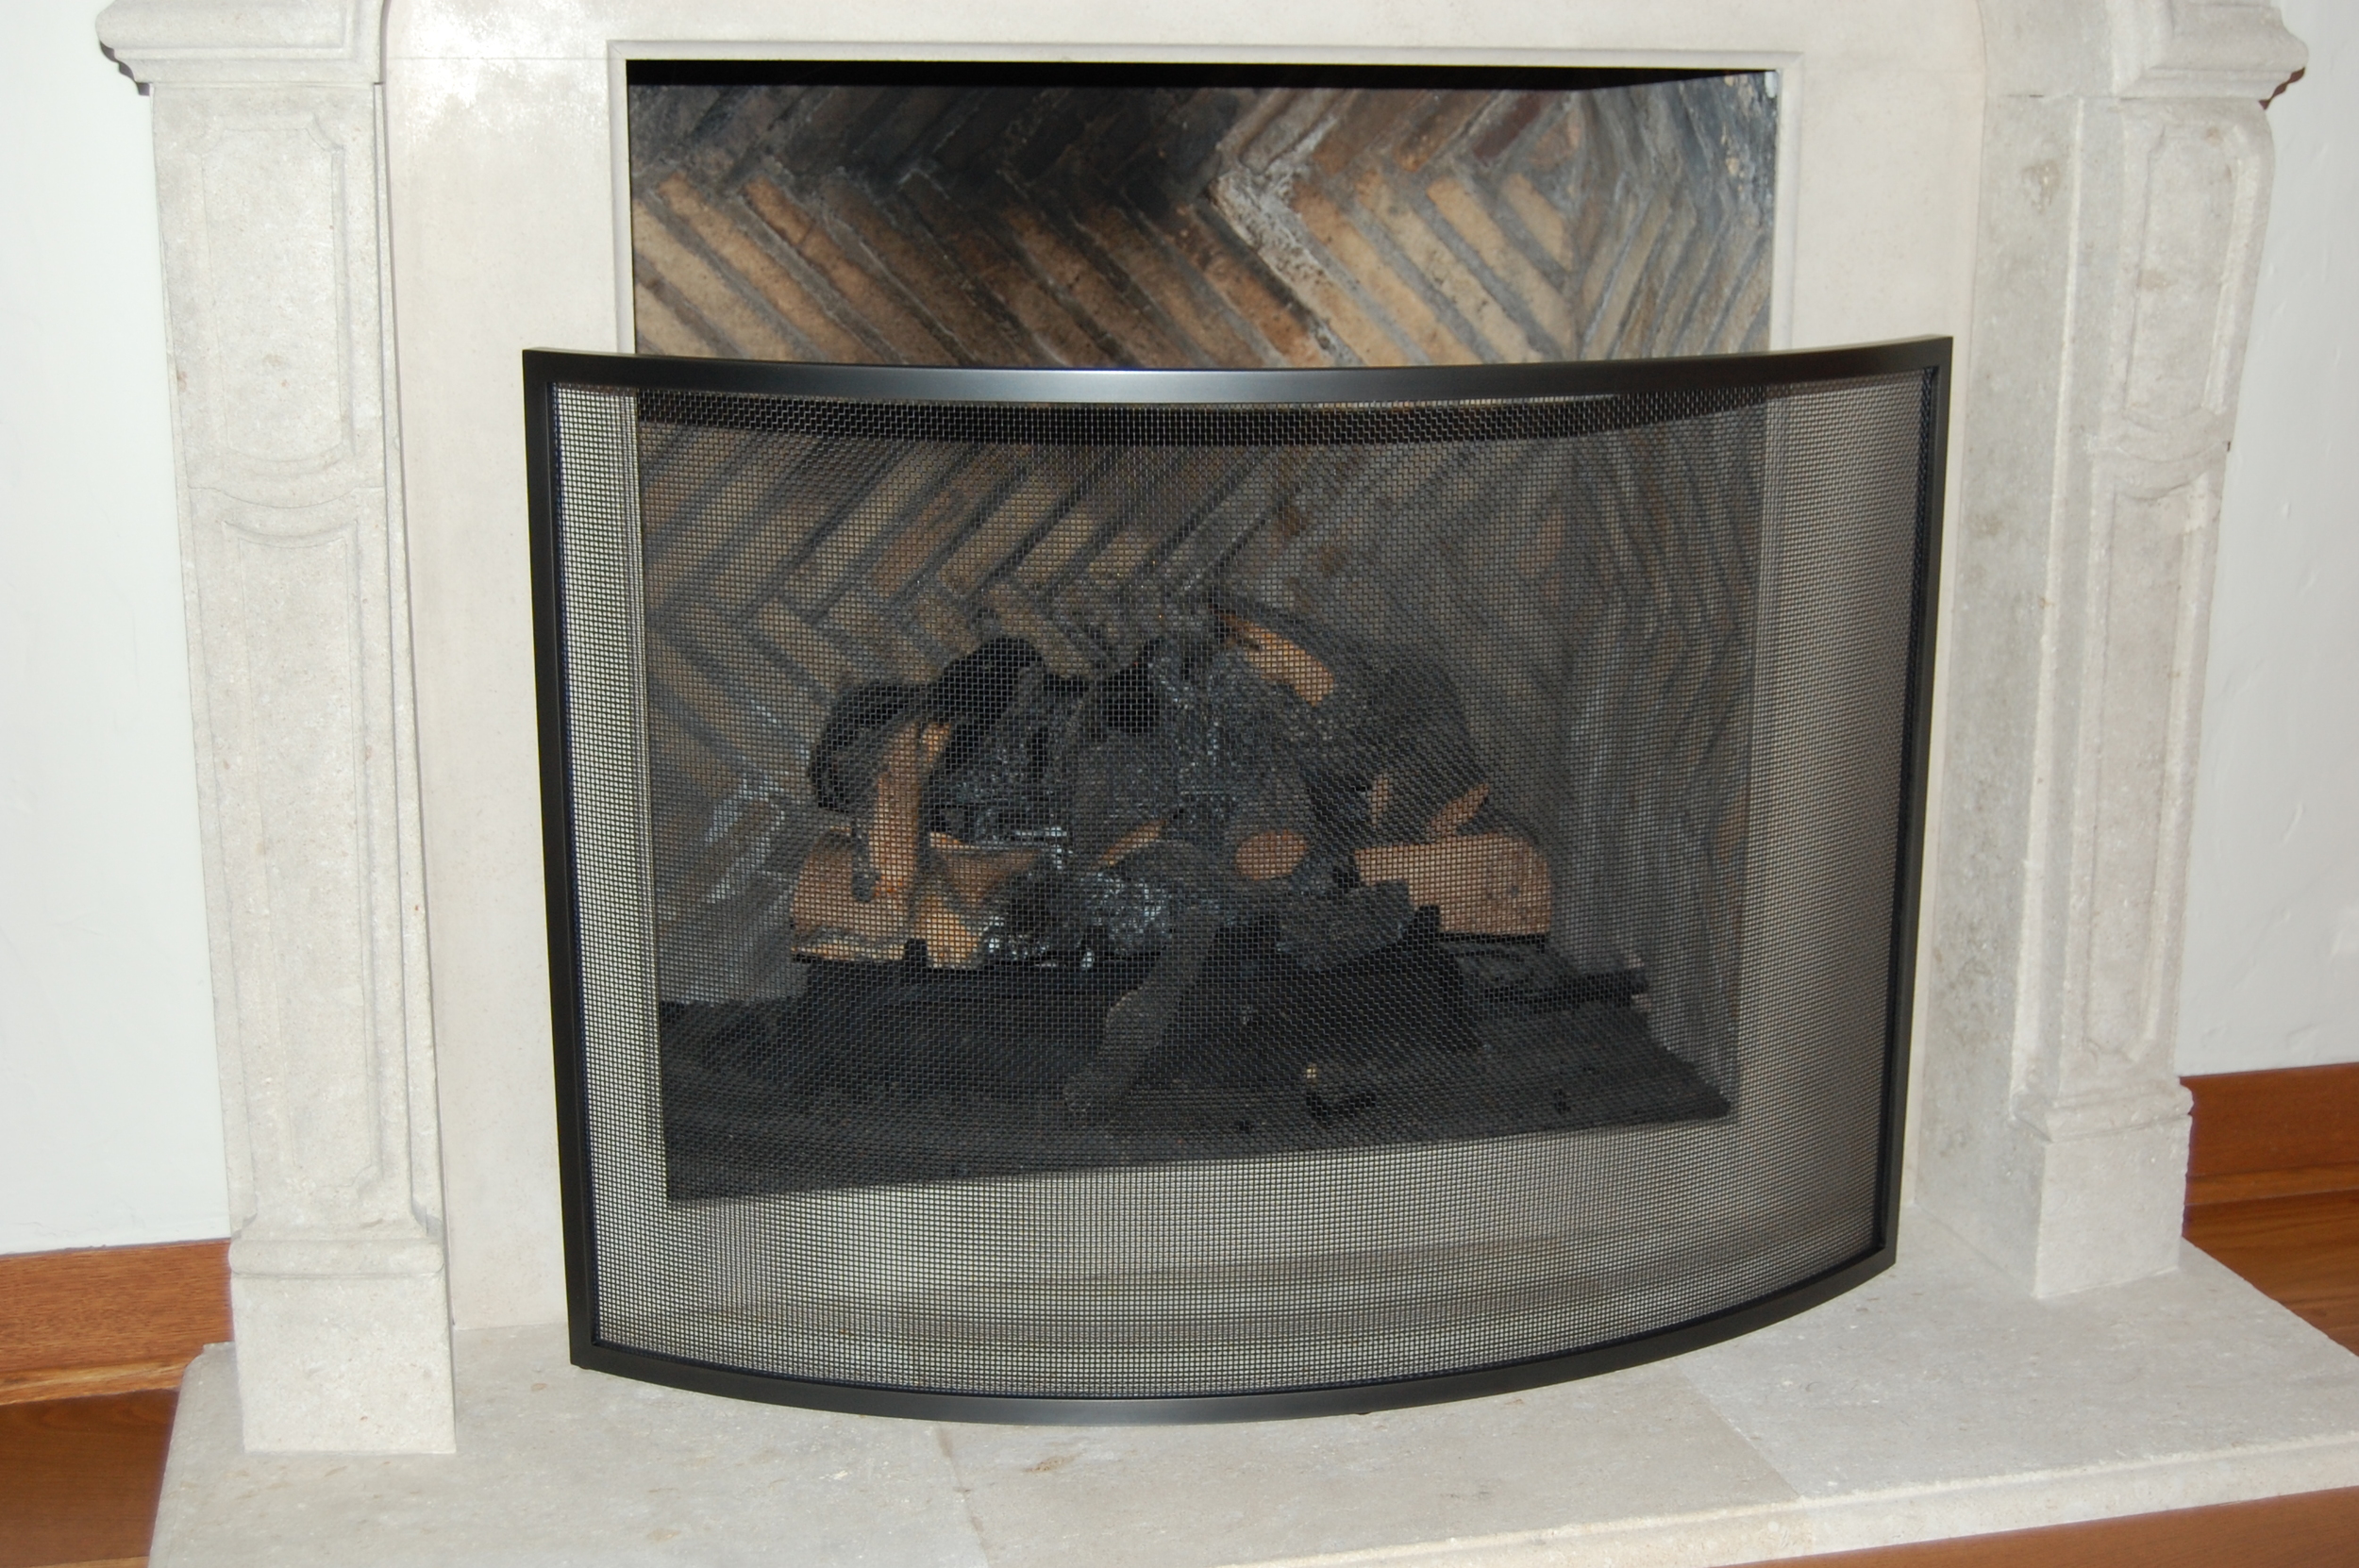  Fire screen built out of blackened steel.  Designed by Formed Objects 